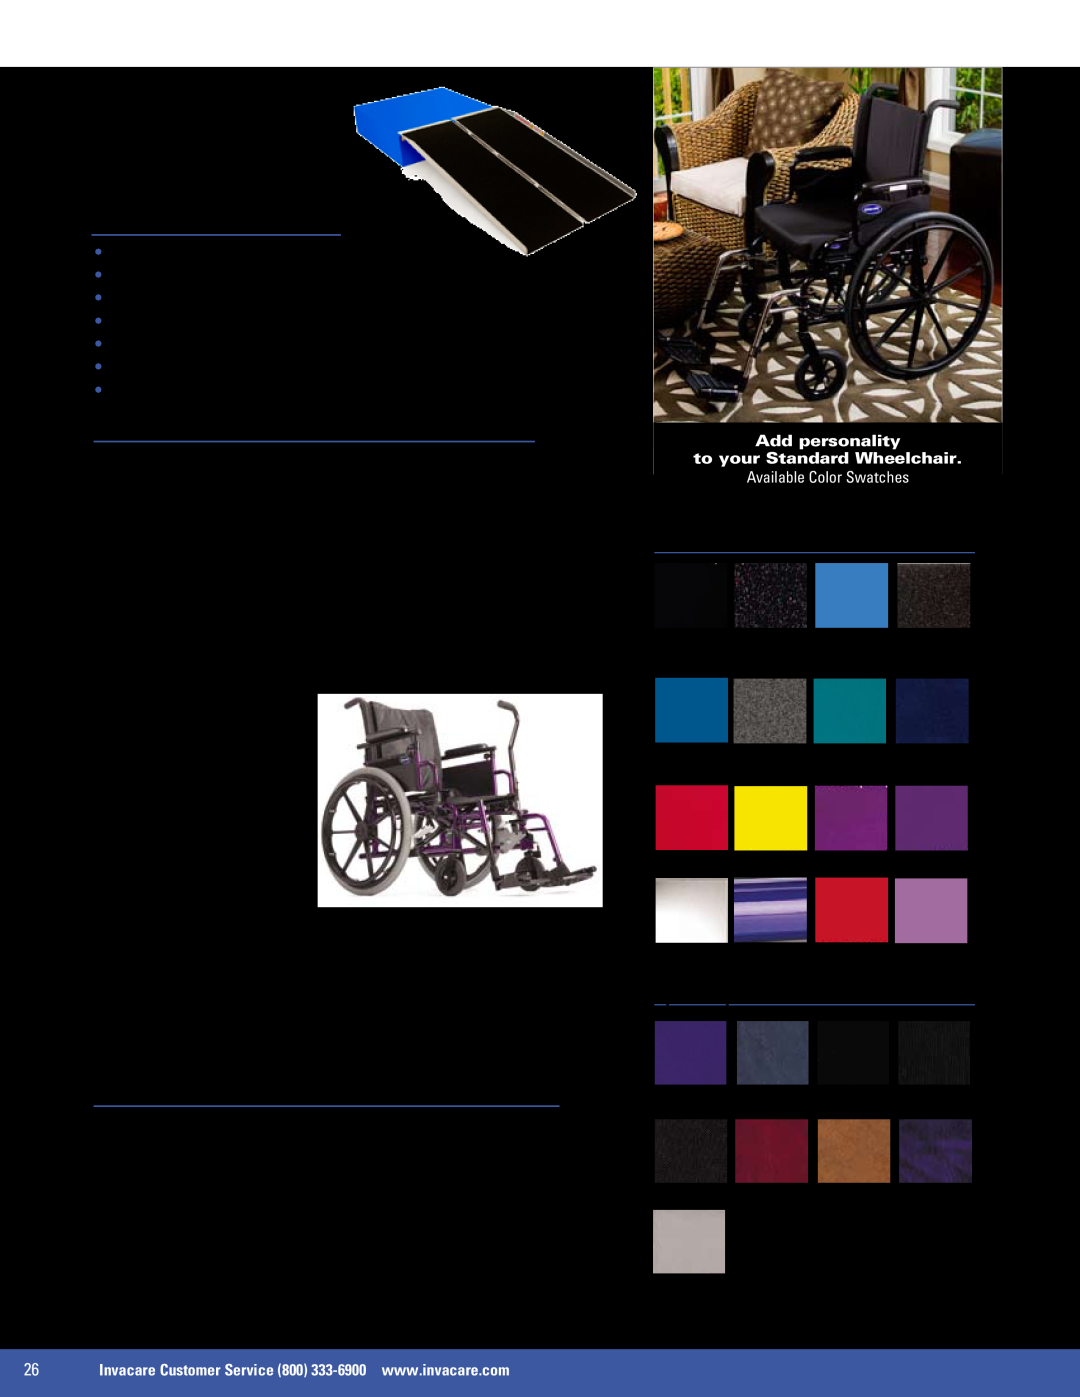 Invacare SX5, 9000 XT Folding Ramps, Cyclical Lever Drive, I N V A C A R E, Features, Specifications, Frame, Upholstery 